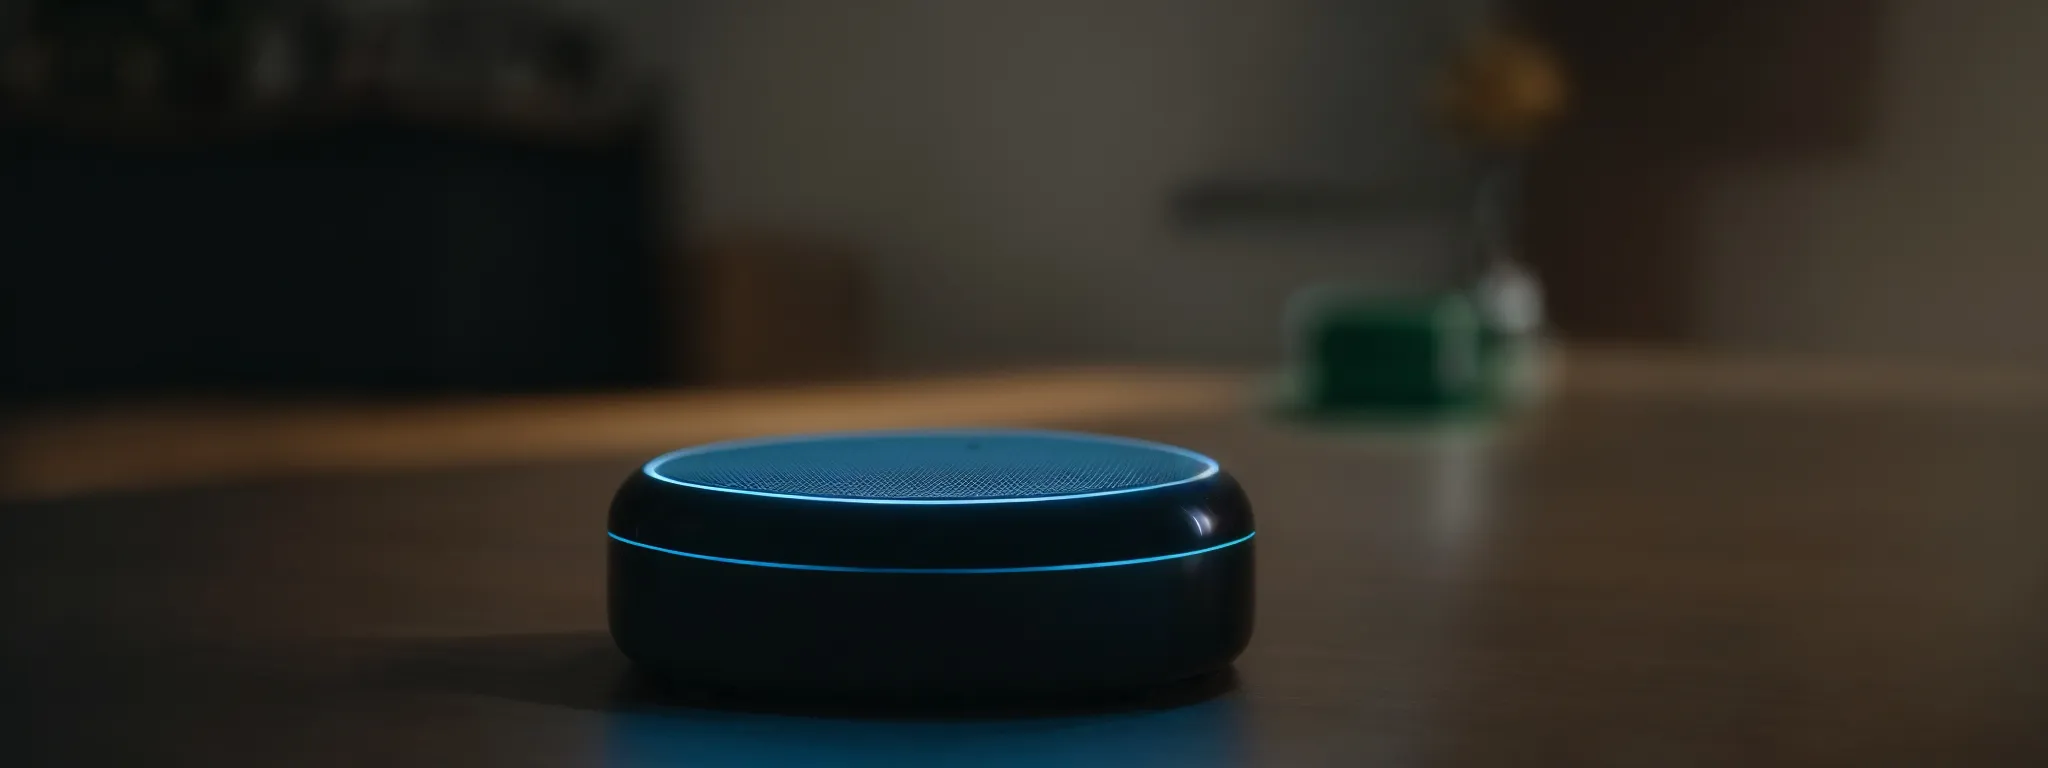 a person speaking into a smart speaker on a table, with a visible response from a virtual assistant glowing on its screen.